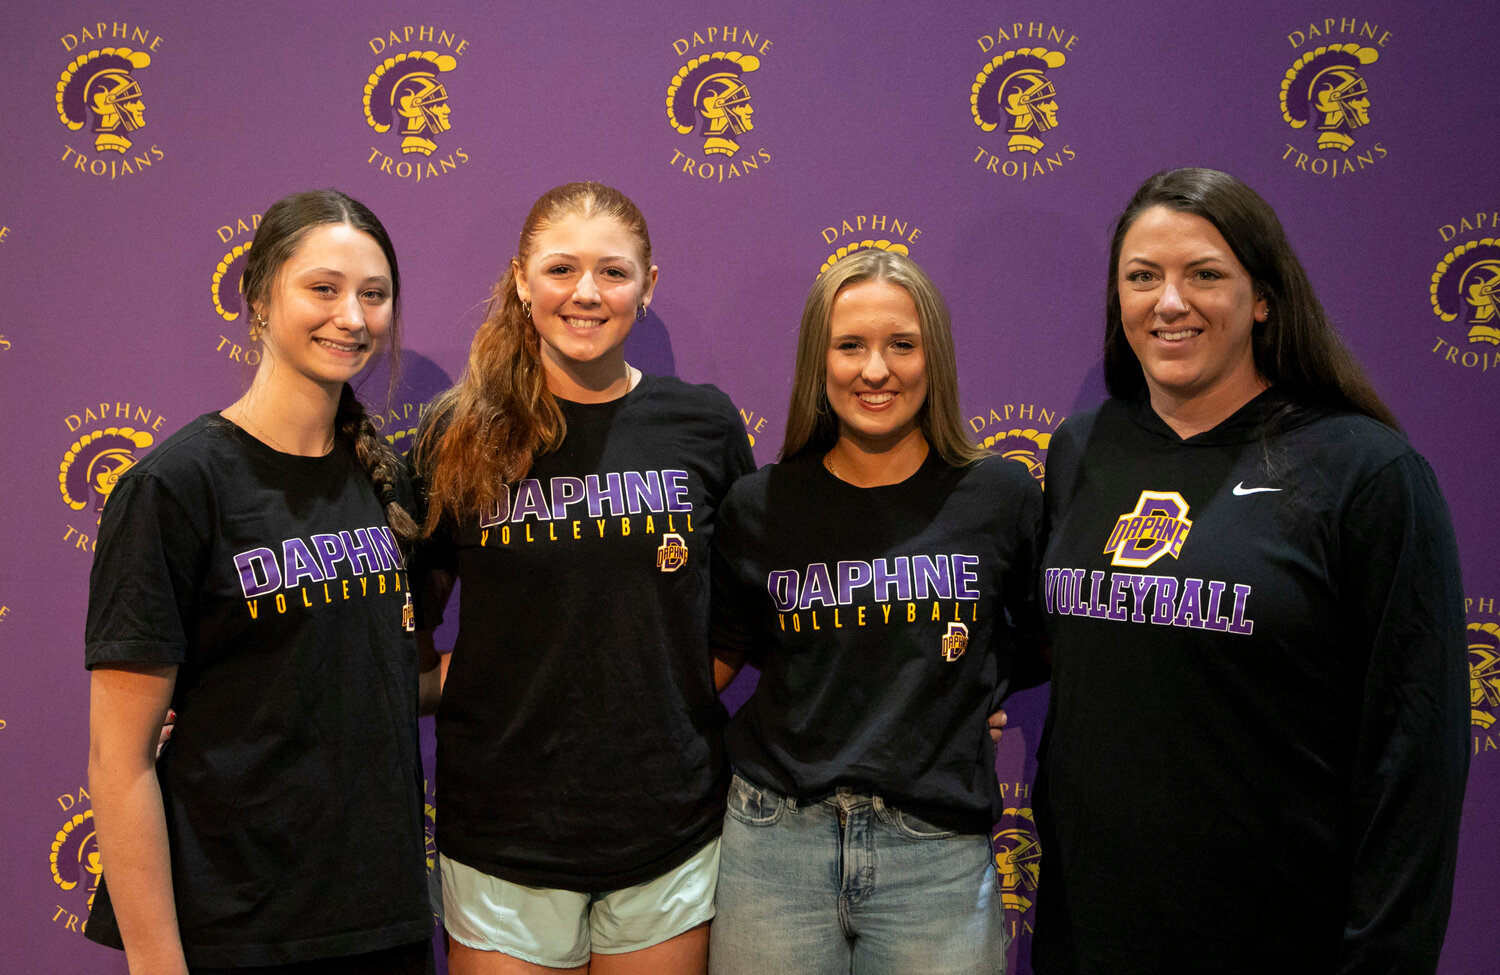 The host Daphne Trojans were represented by Ella Lomax, AG Chason, Lucy McCoy and head coach Casey Craig on Monday, Aug. 7, for the Volleyball Media Day at Trojan Hall. Ten local teams previewed their upcoming season and highlighted players to watch.